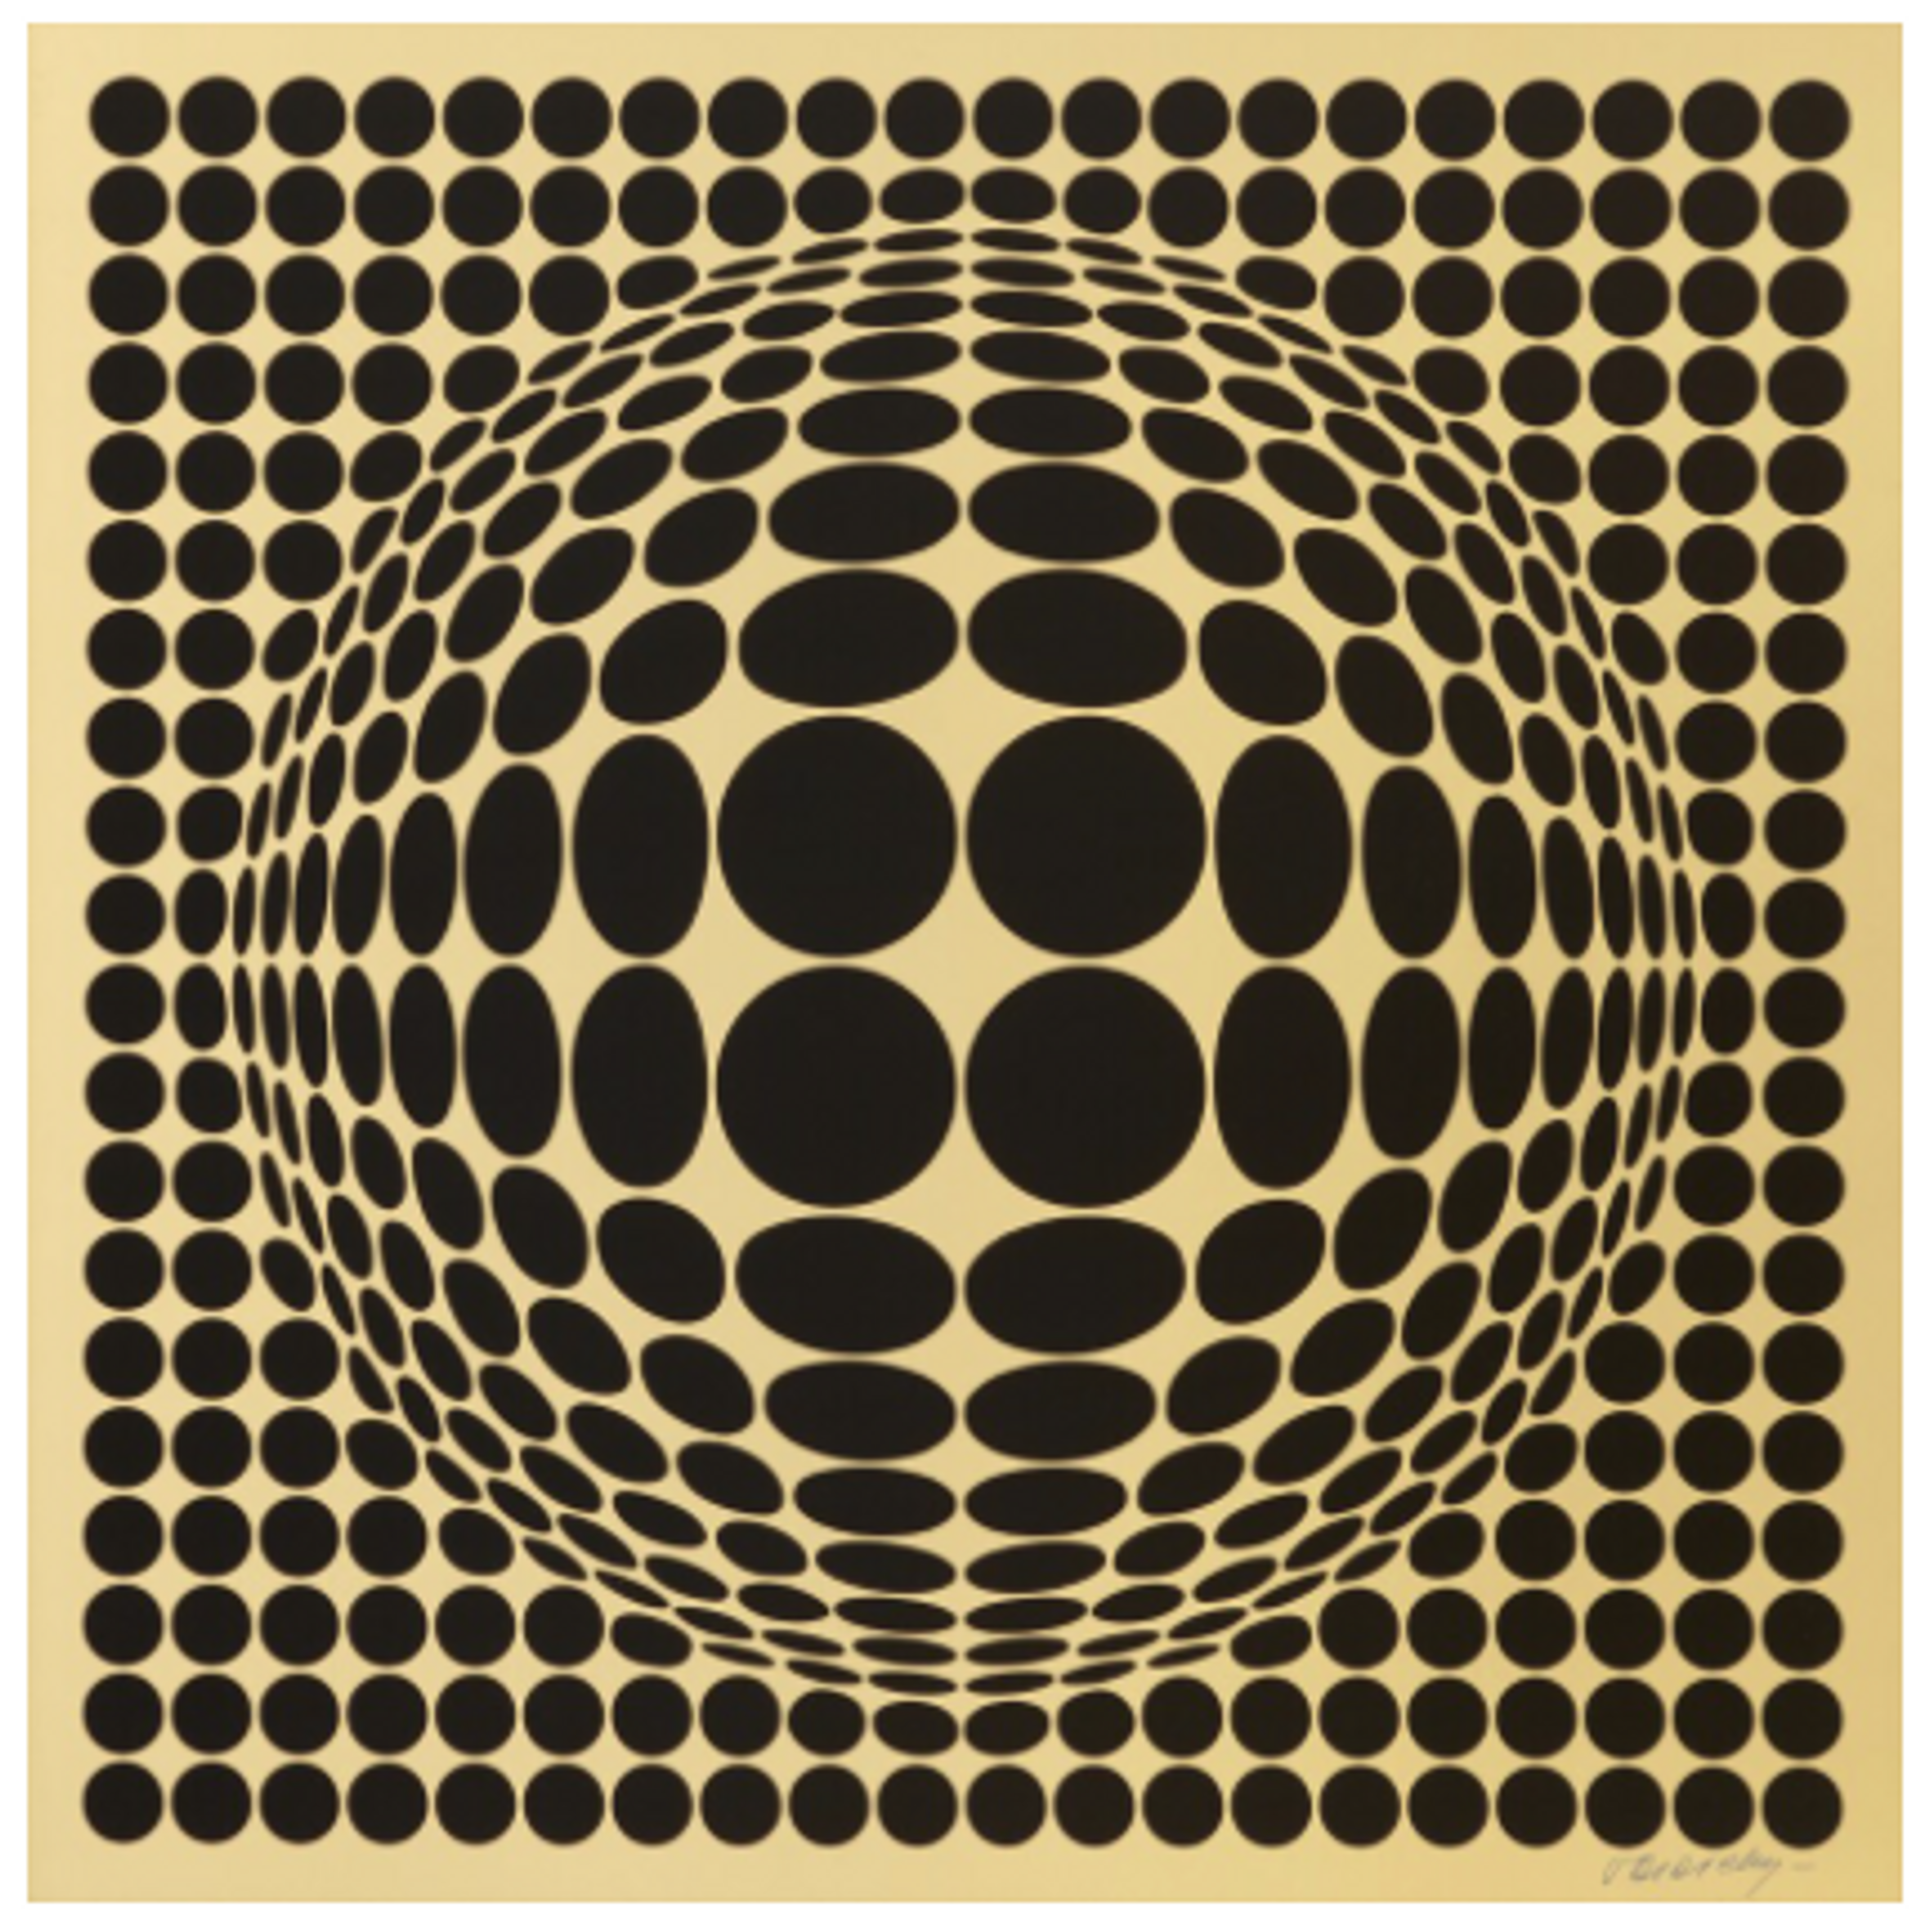 A visually striking artwork composed of gold and black geometric shapes, including circles of varying sizes arranged in a grid-like pattern. The arrangement creates an optical illusion, giving the impression of a floating three-dimensional circle.